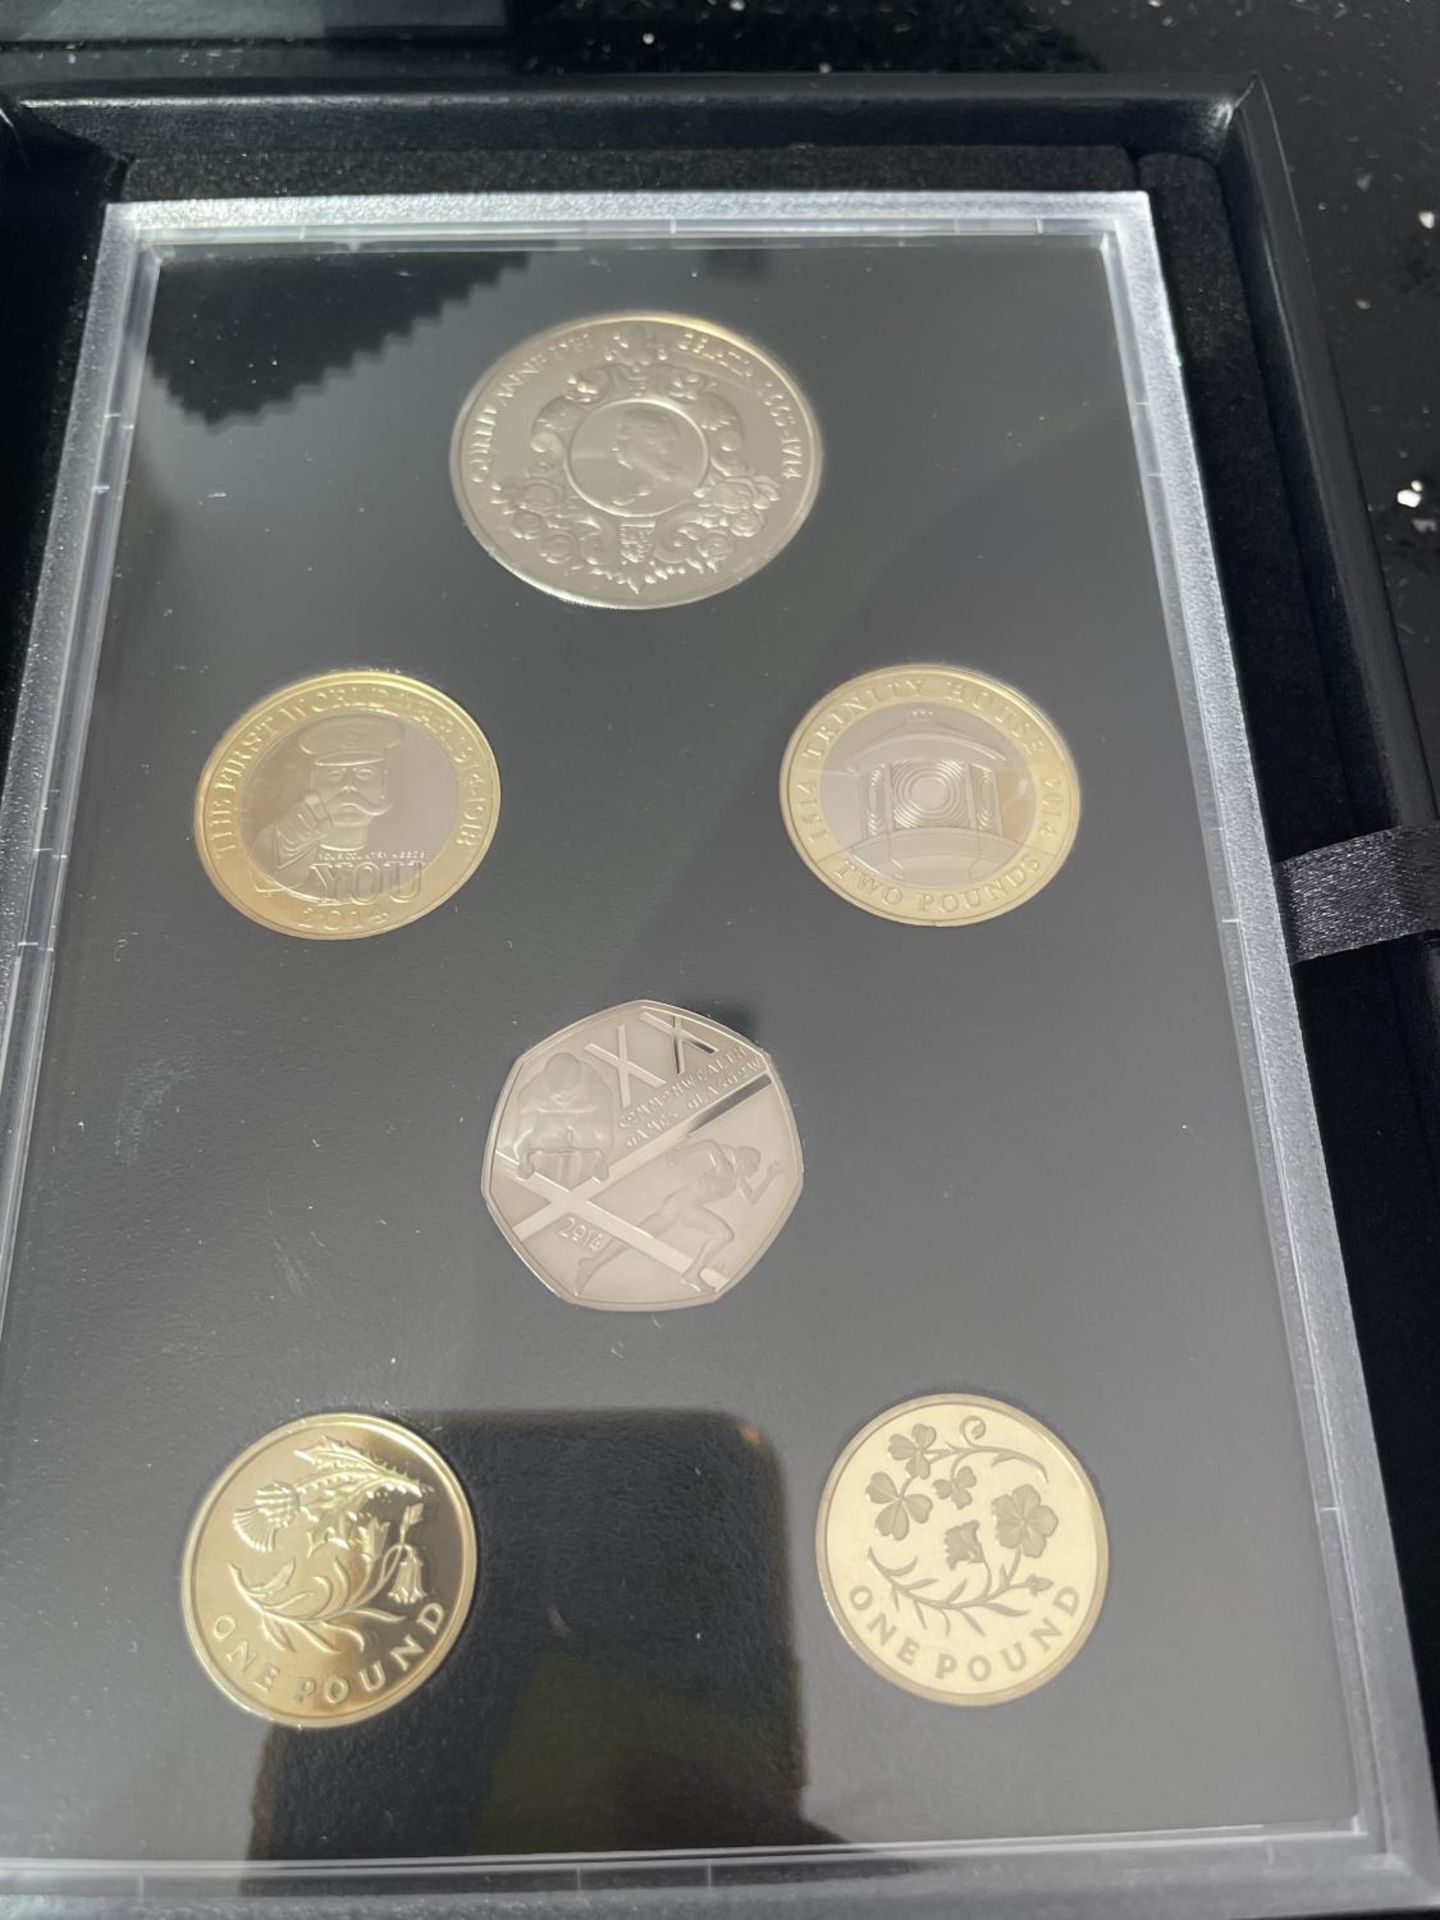 THE 2014 UK PROOF COIN SET, “COLLECTOR’S” EDITION - Image 4 of 6